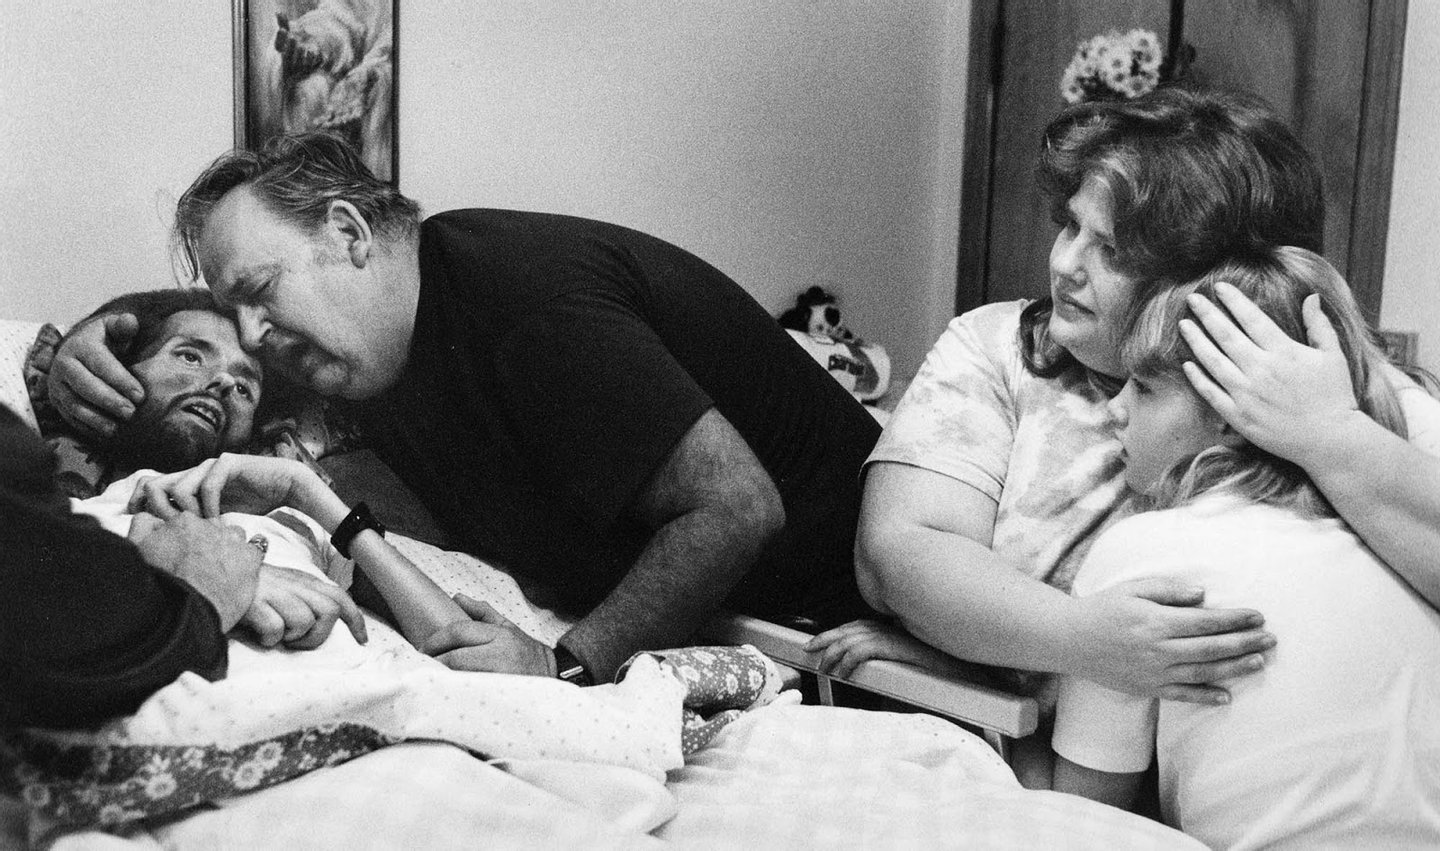 http://observador.pt/wp-content/uploads/2016/01/a-father-comforts-his-son-on-his-deathbed-the-photo-that-changed-the-face-of-aids-1989-life.jpg